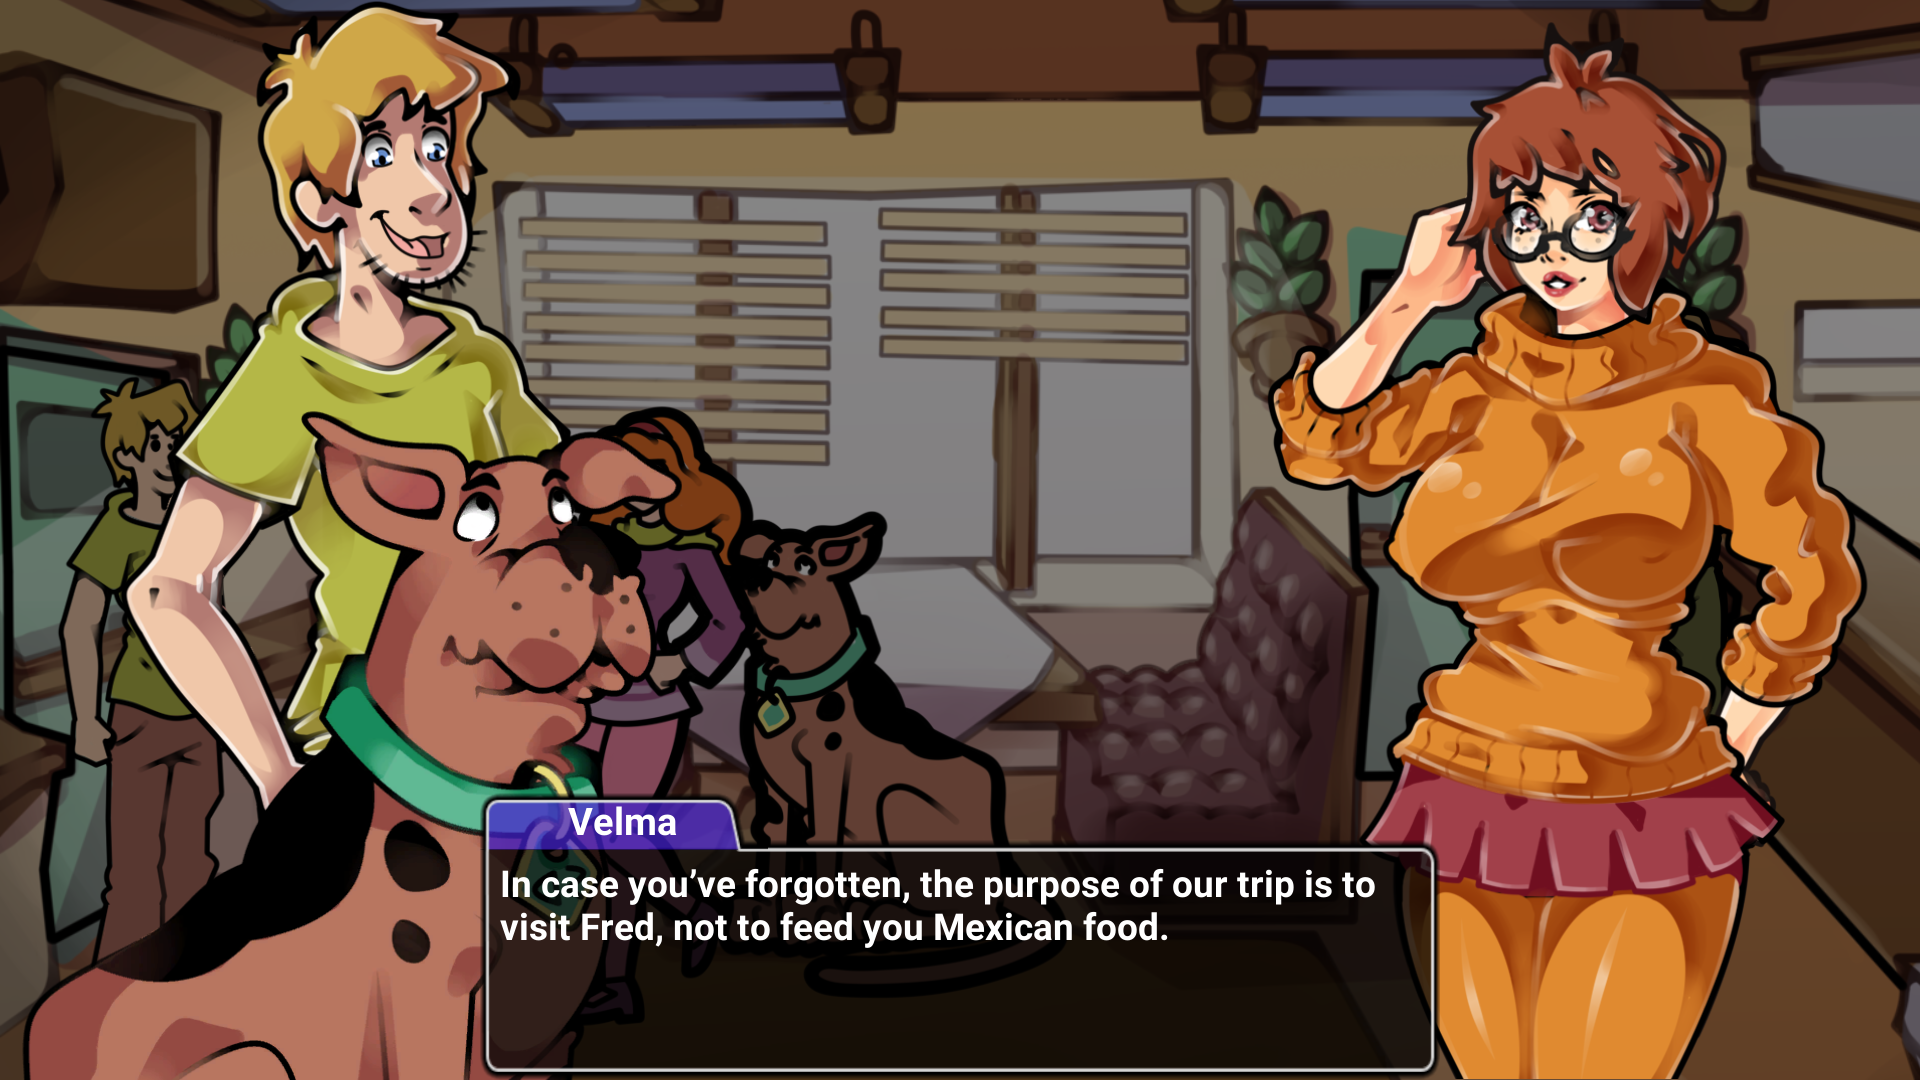 Whats New Scooby Doo Porn - Scooby-Doo! A Depraved Investigation [DEMO] - free game download, reviews,  mega - xGames